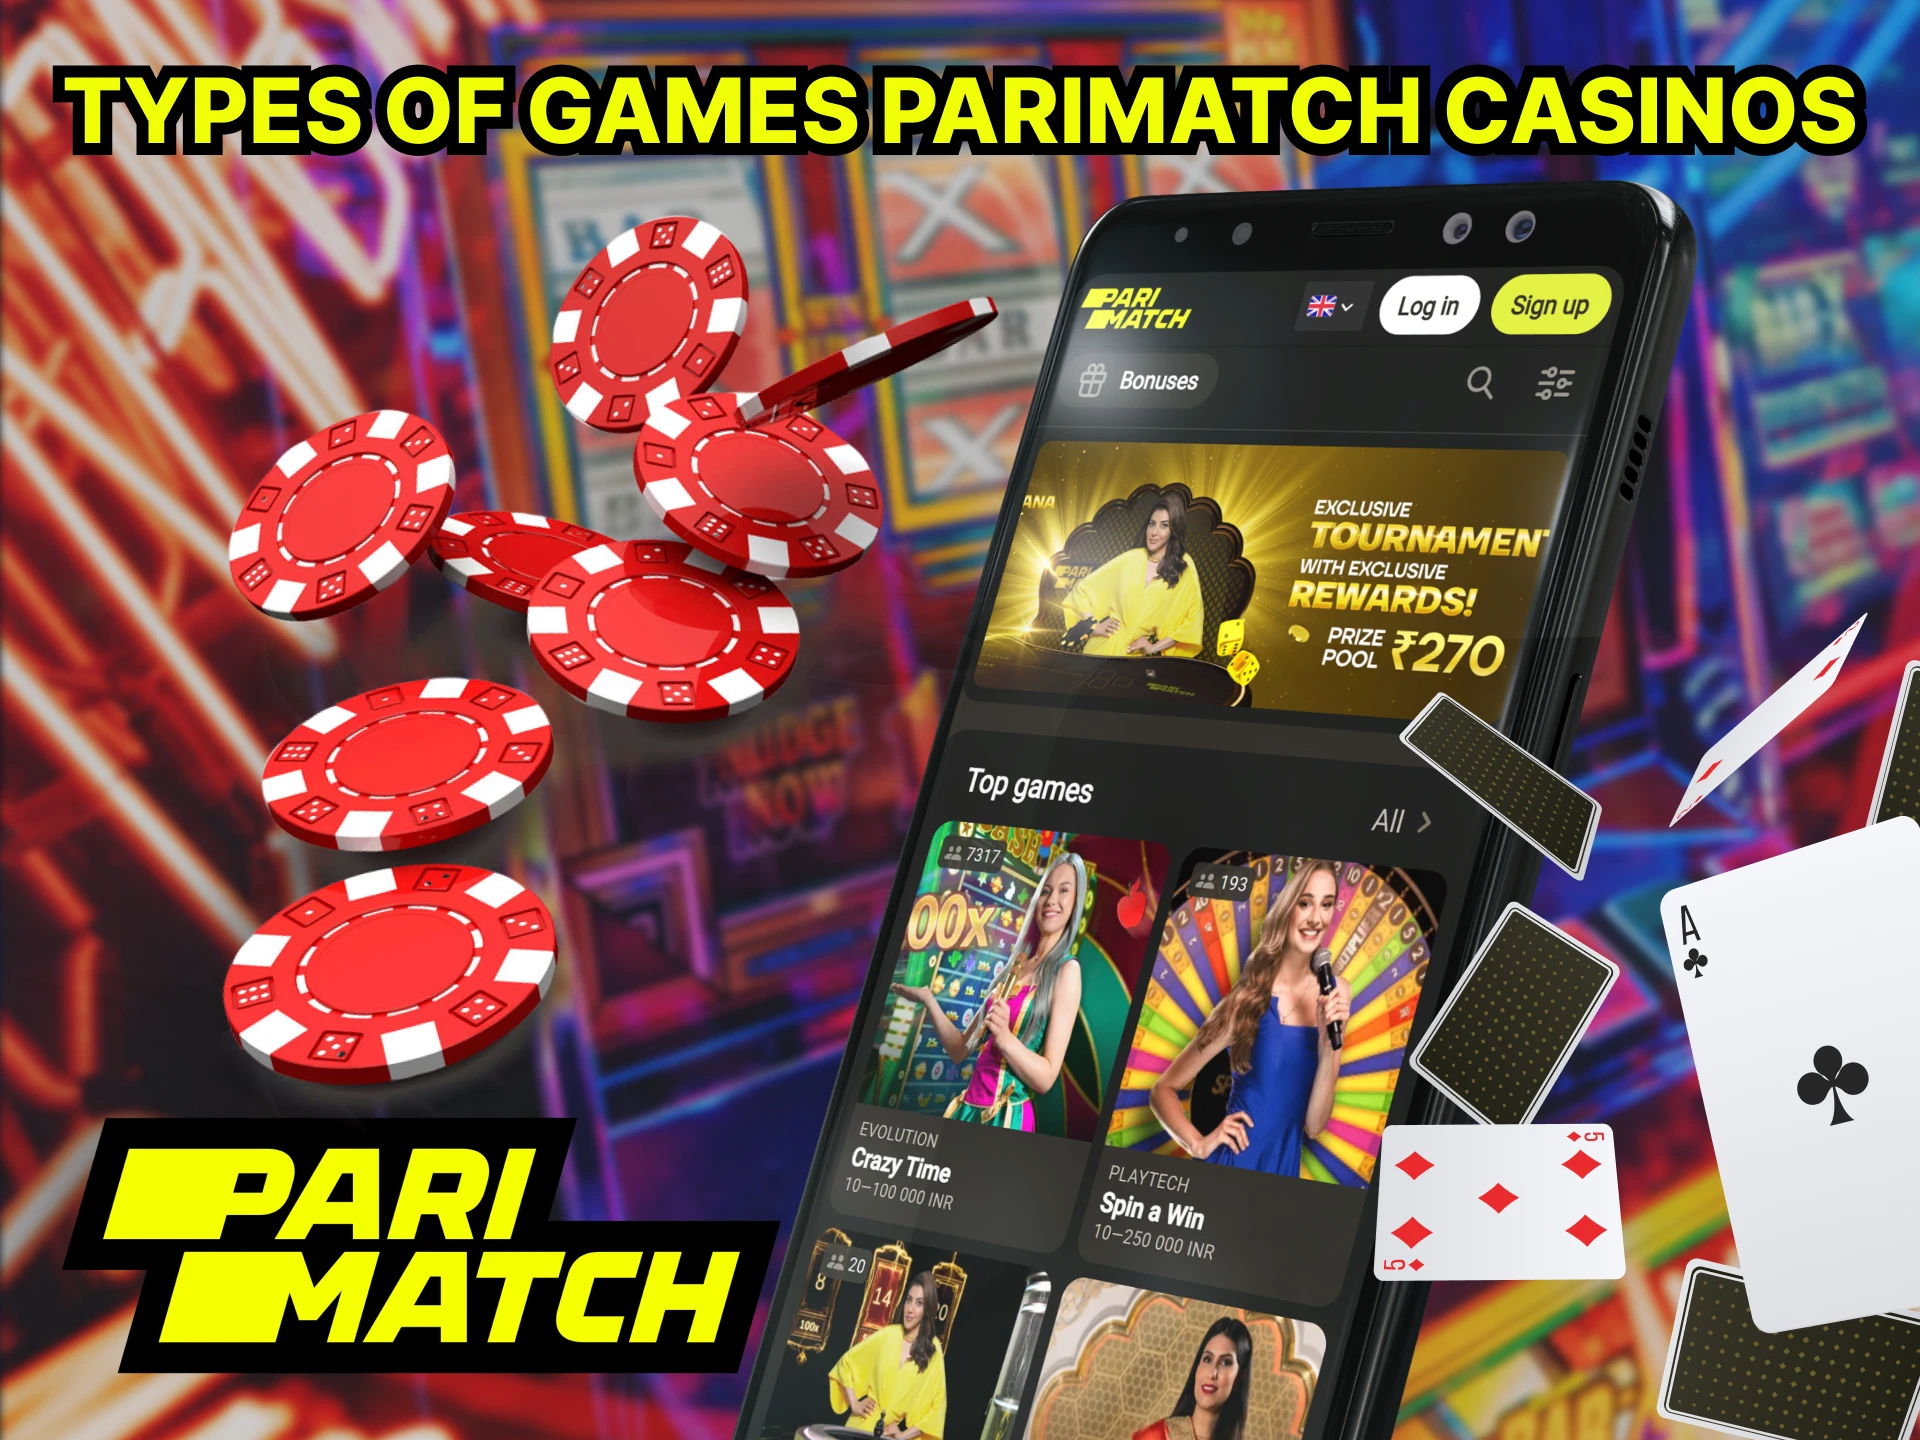 Try different types of games at Parimatch Casino.